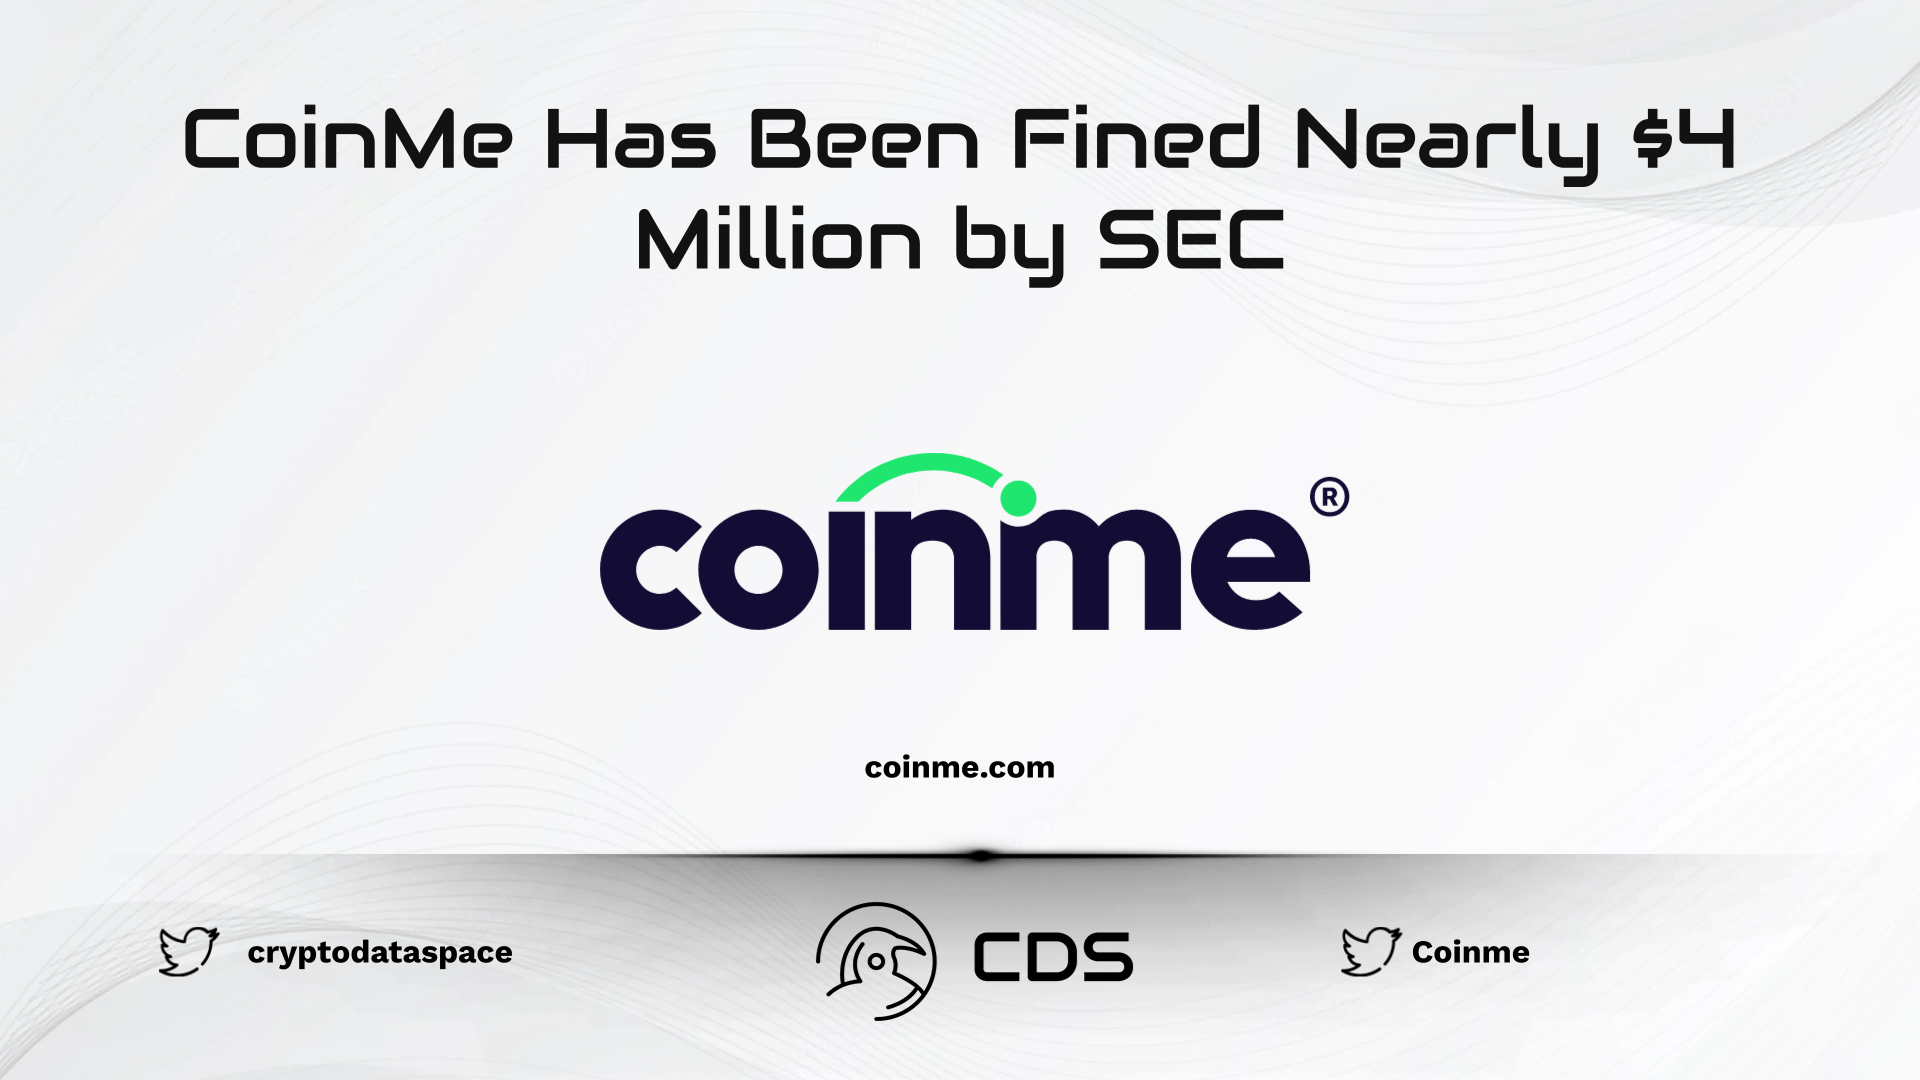 CoinMe Exchange Has Been Fined Nearly $4 Million by SEC